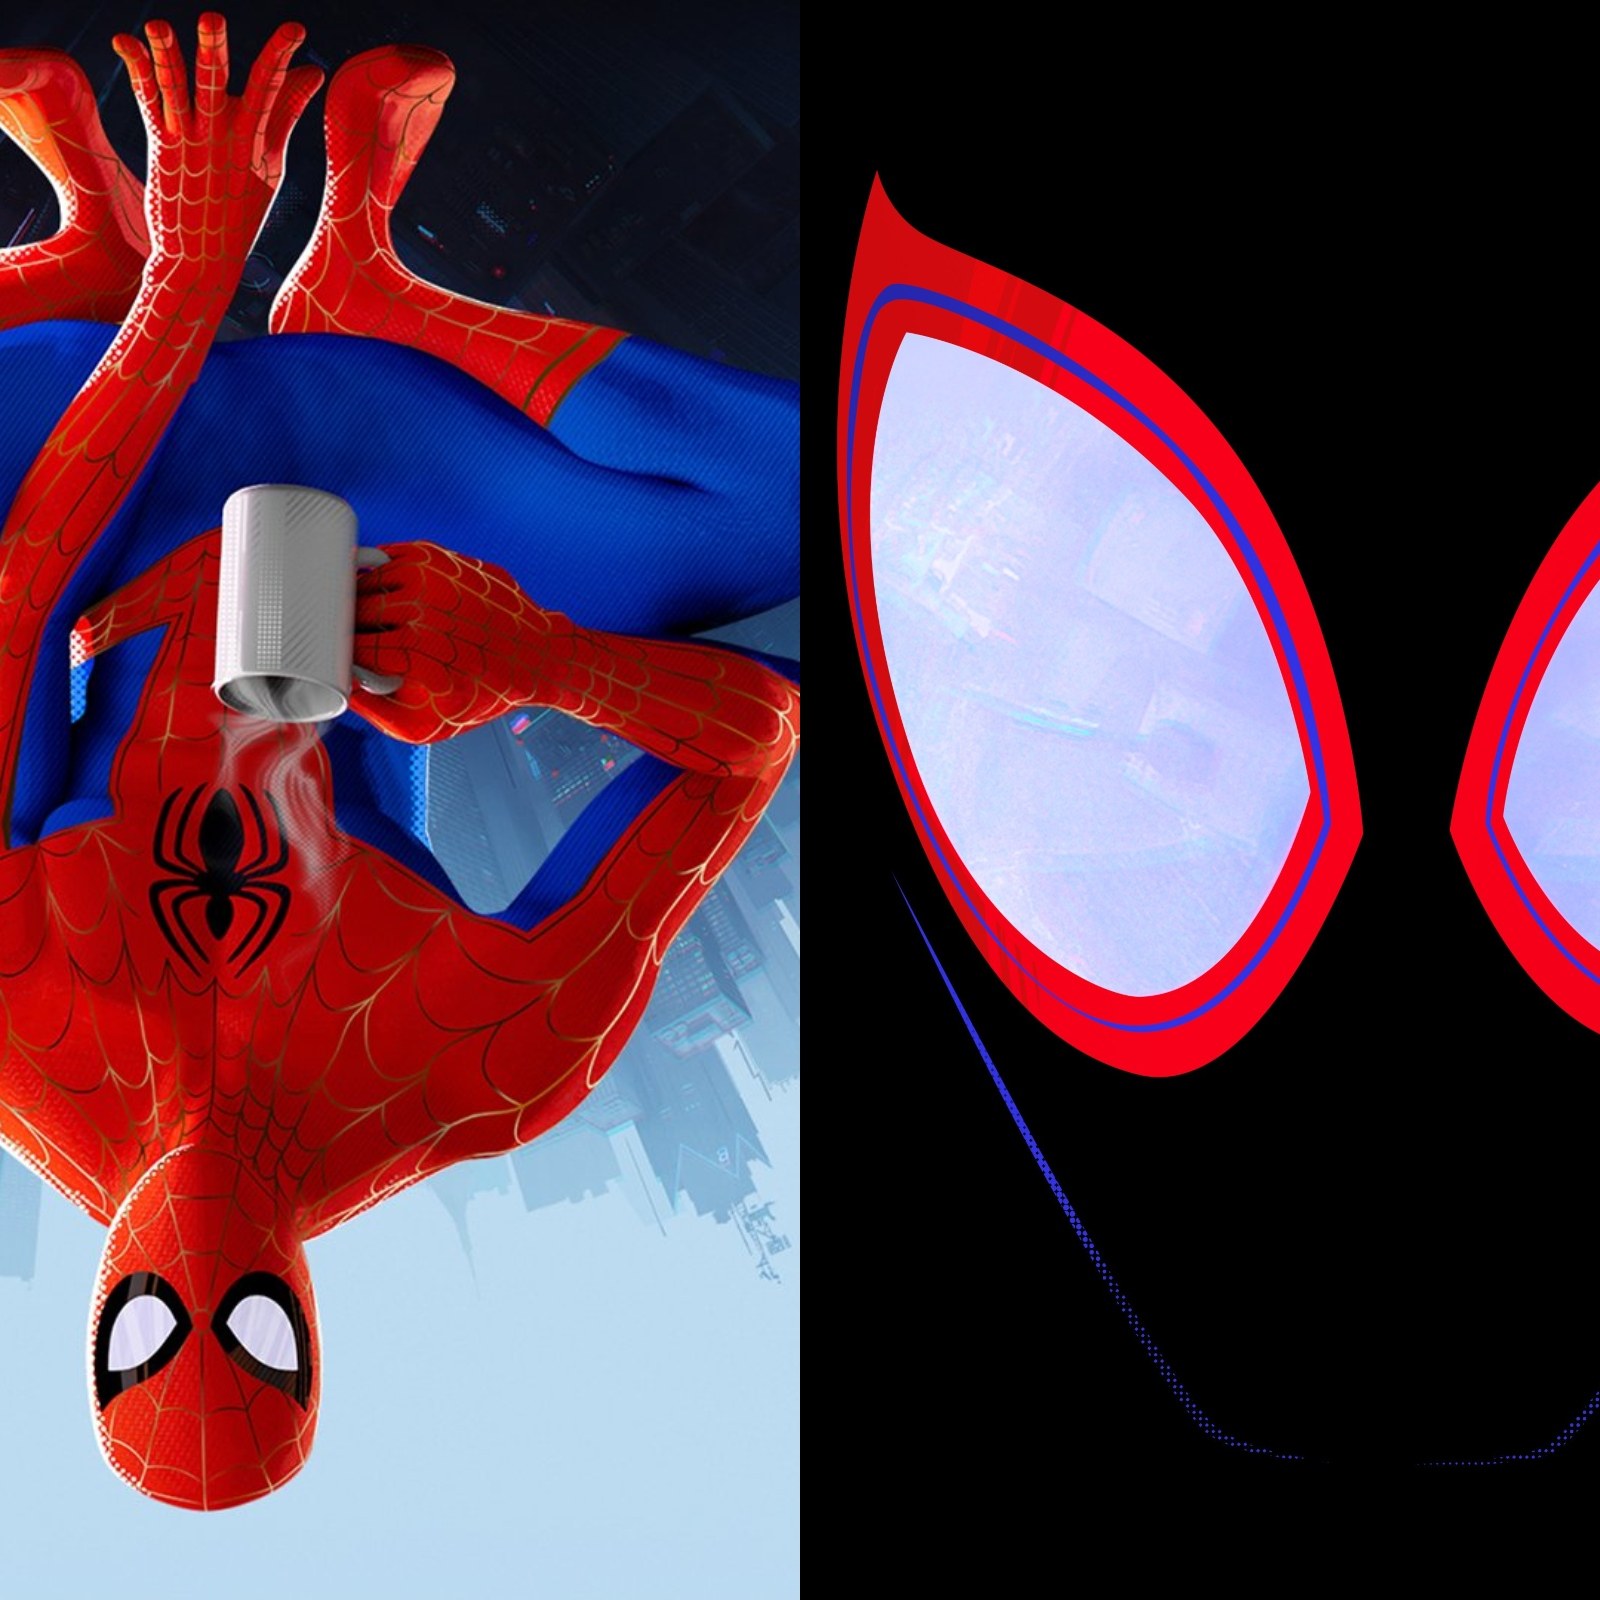 Spider-Verse' Movie Delayed as Sony Pictures Announces Movie Rescheduling